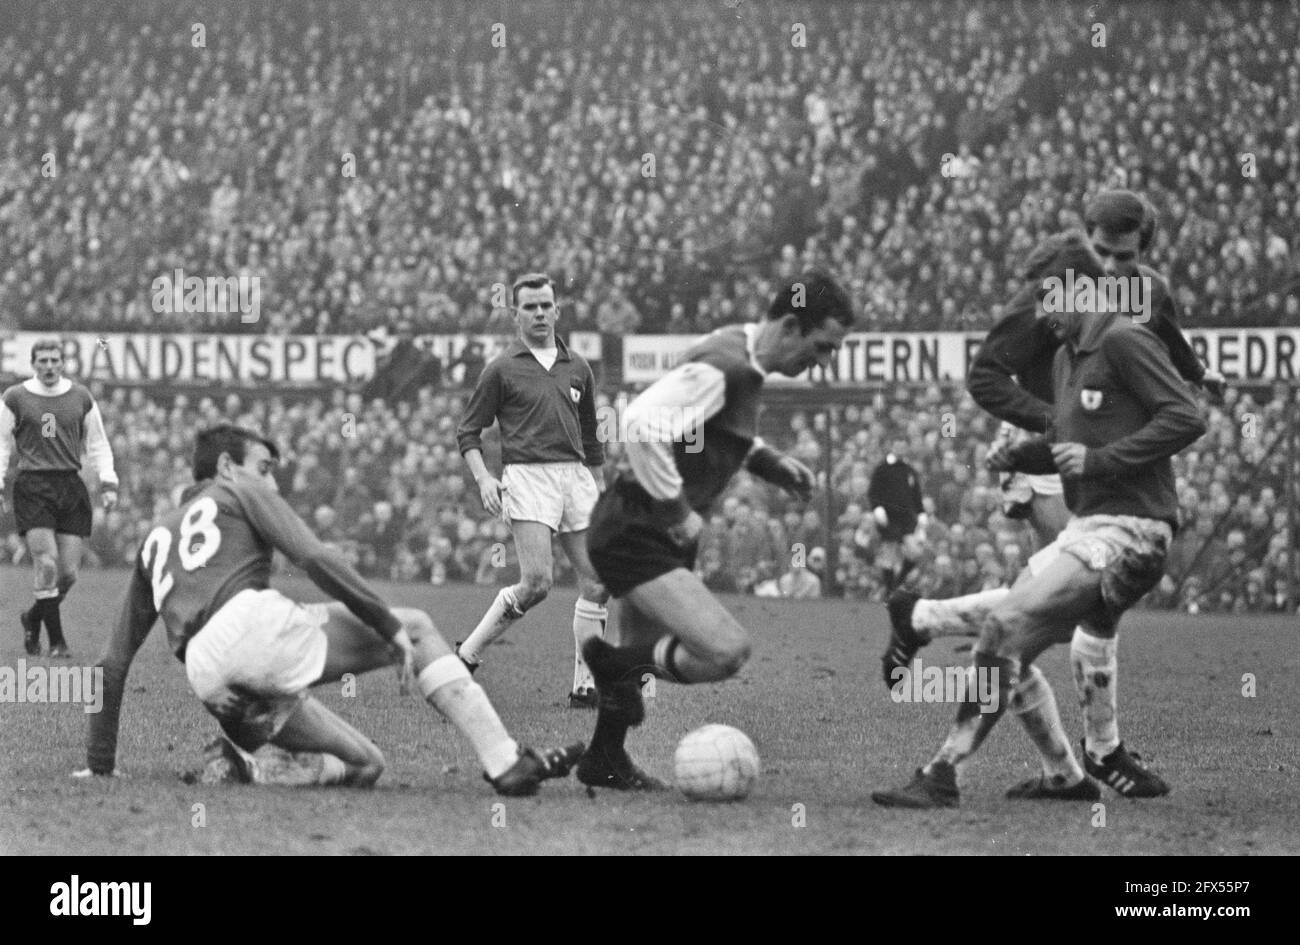 Feyenoord v NEC 2-0. Samardzic with four opponents around him; Ad Mellaart (28), Chris Geutjes, Kees Kornelis, 7 January 1968, sports, soccer, The Netherlands, 20th century press agency photo, news to remember, documentary, historic photography 1945-1990, visual stories, human history of the Twentieth Century, capturing moments in time Stock Photo